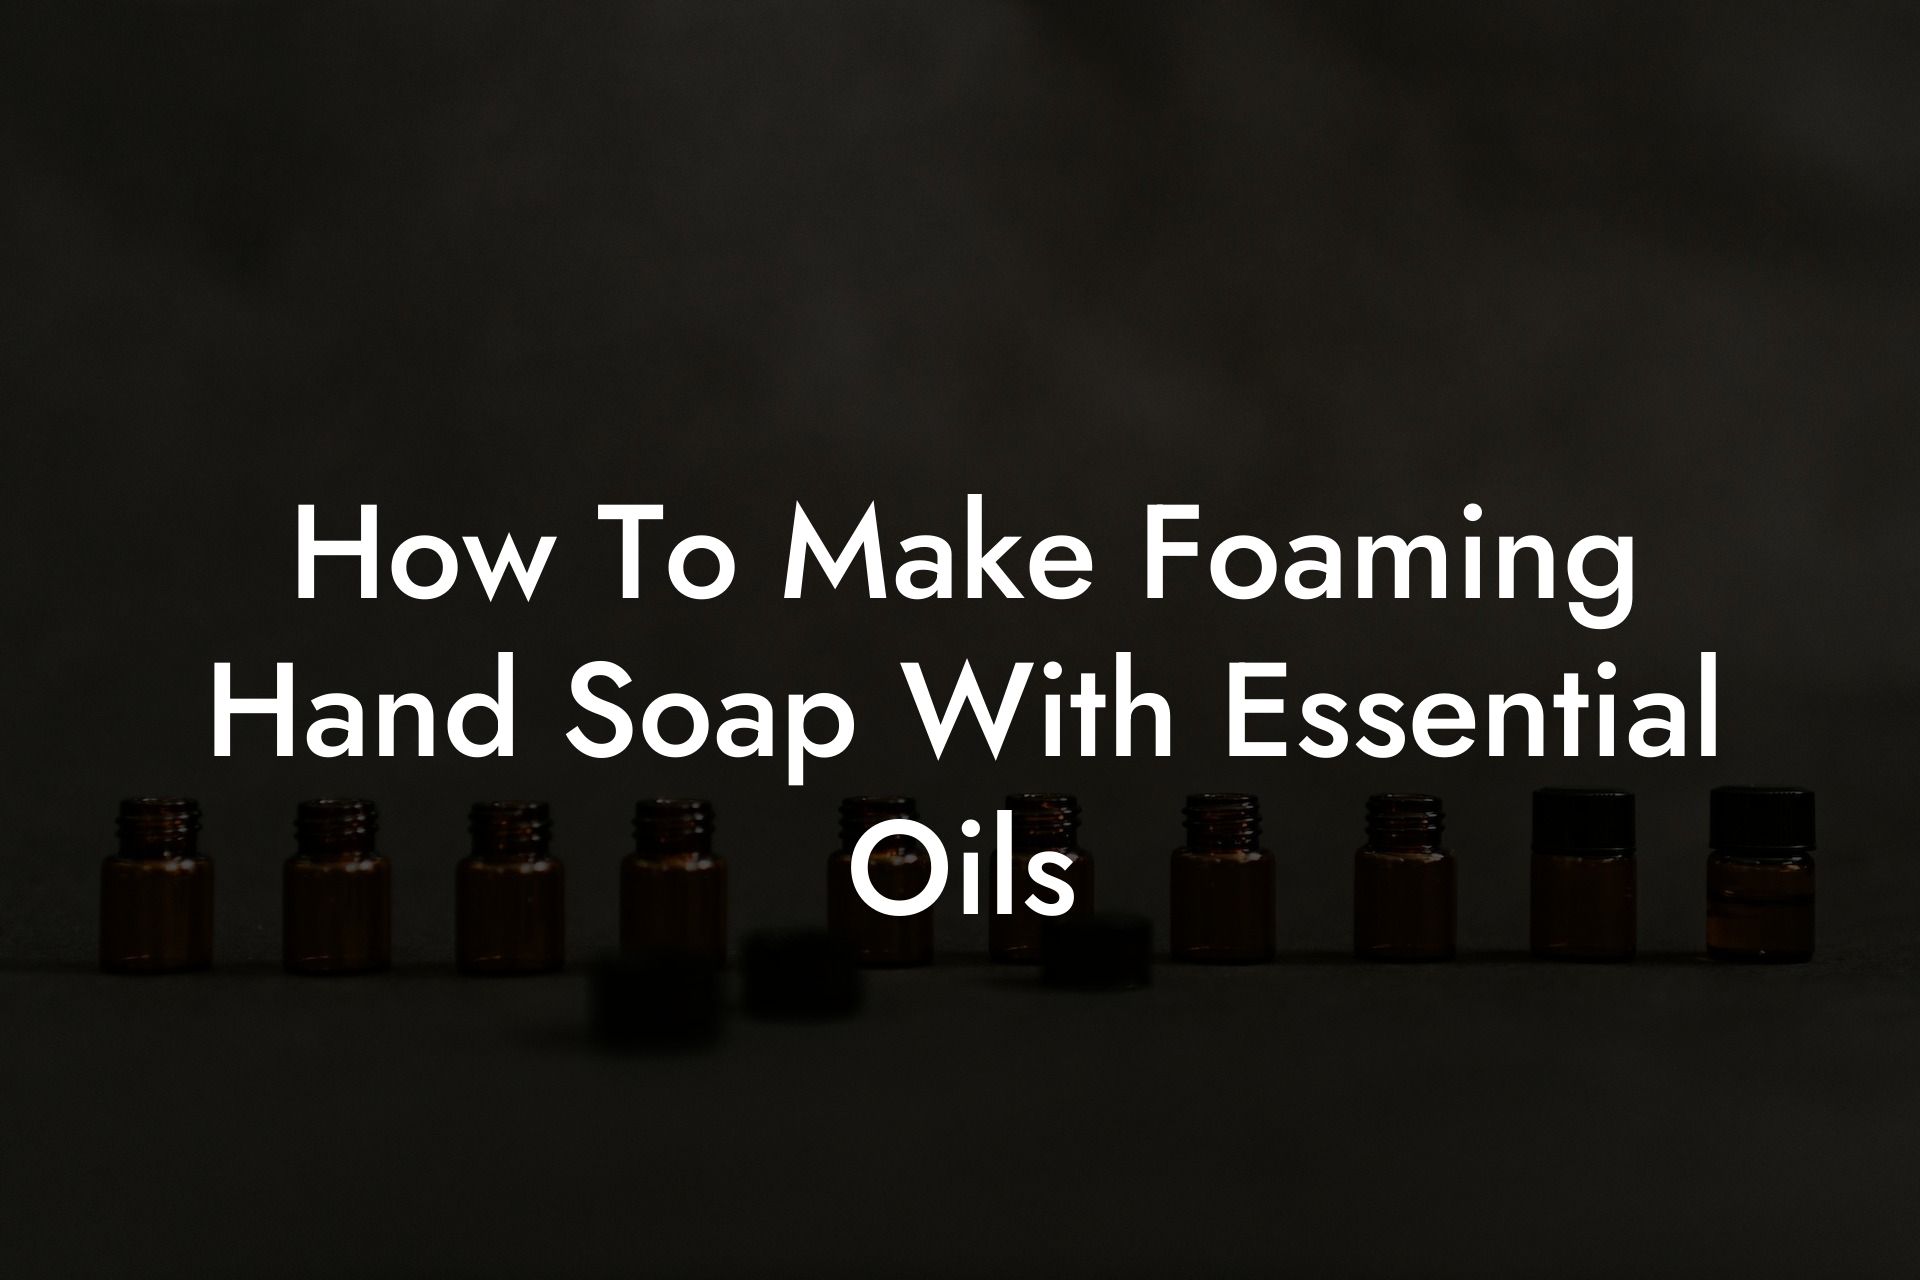 How To Make Foaming Hand Soap With Essential Oils